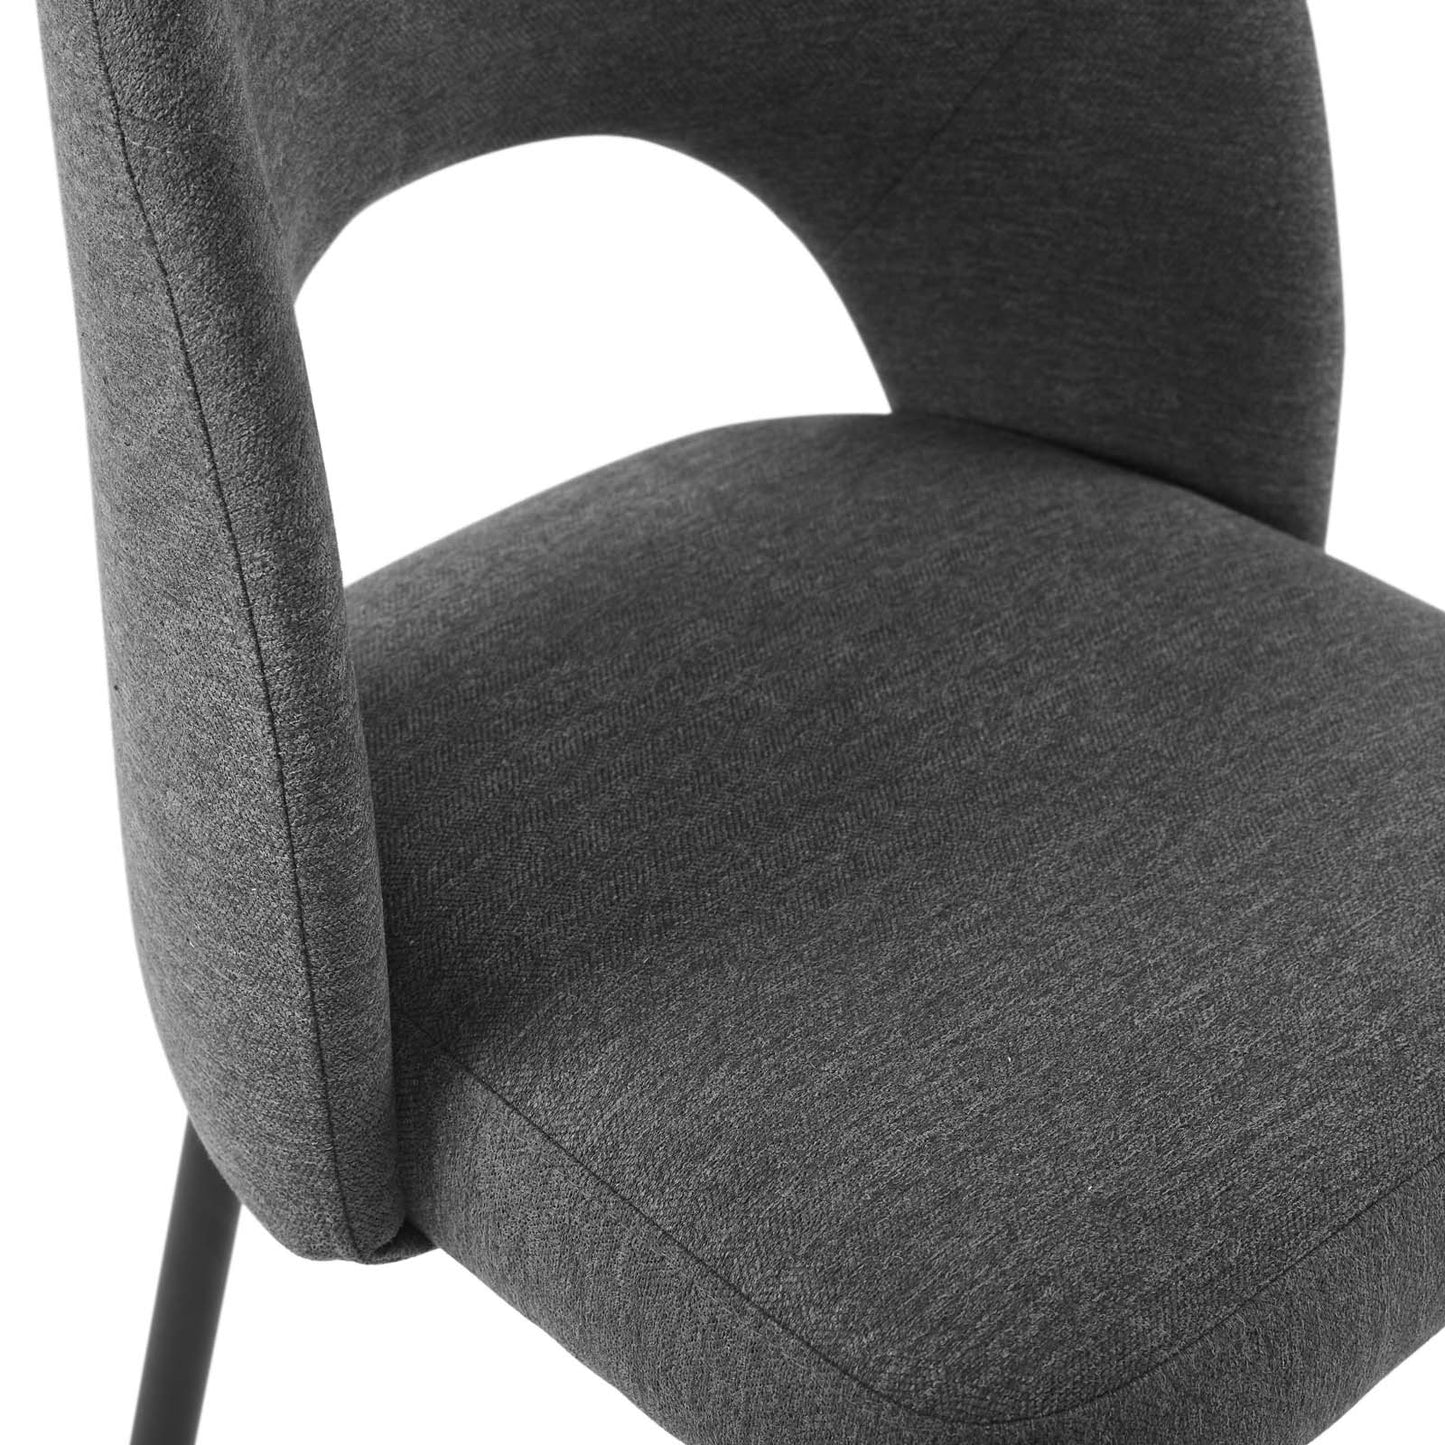 Rouse Dining Side Chair Upholstered Fabric Set of 2 Black Charcoal EEI-4490-BLK-CHA